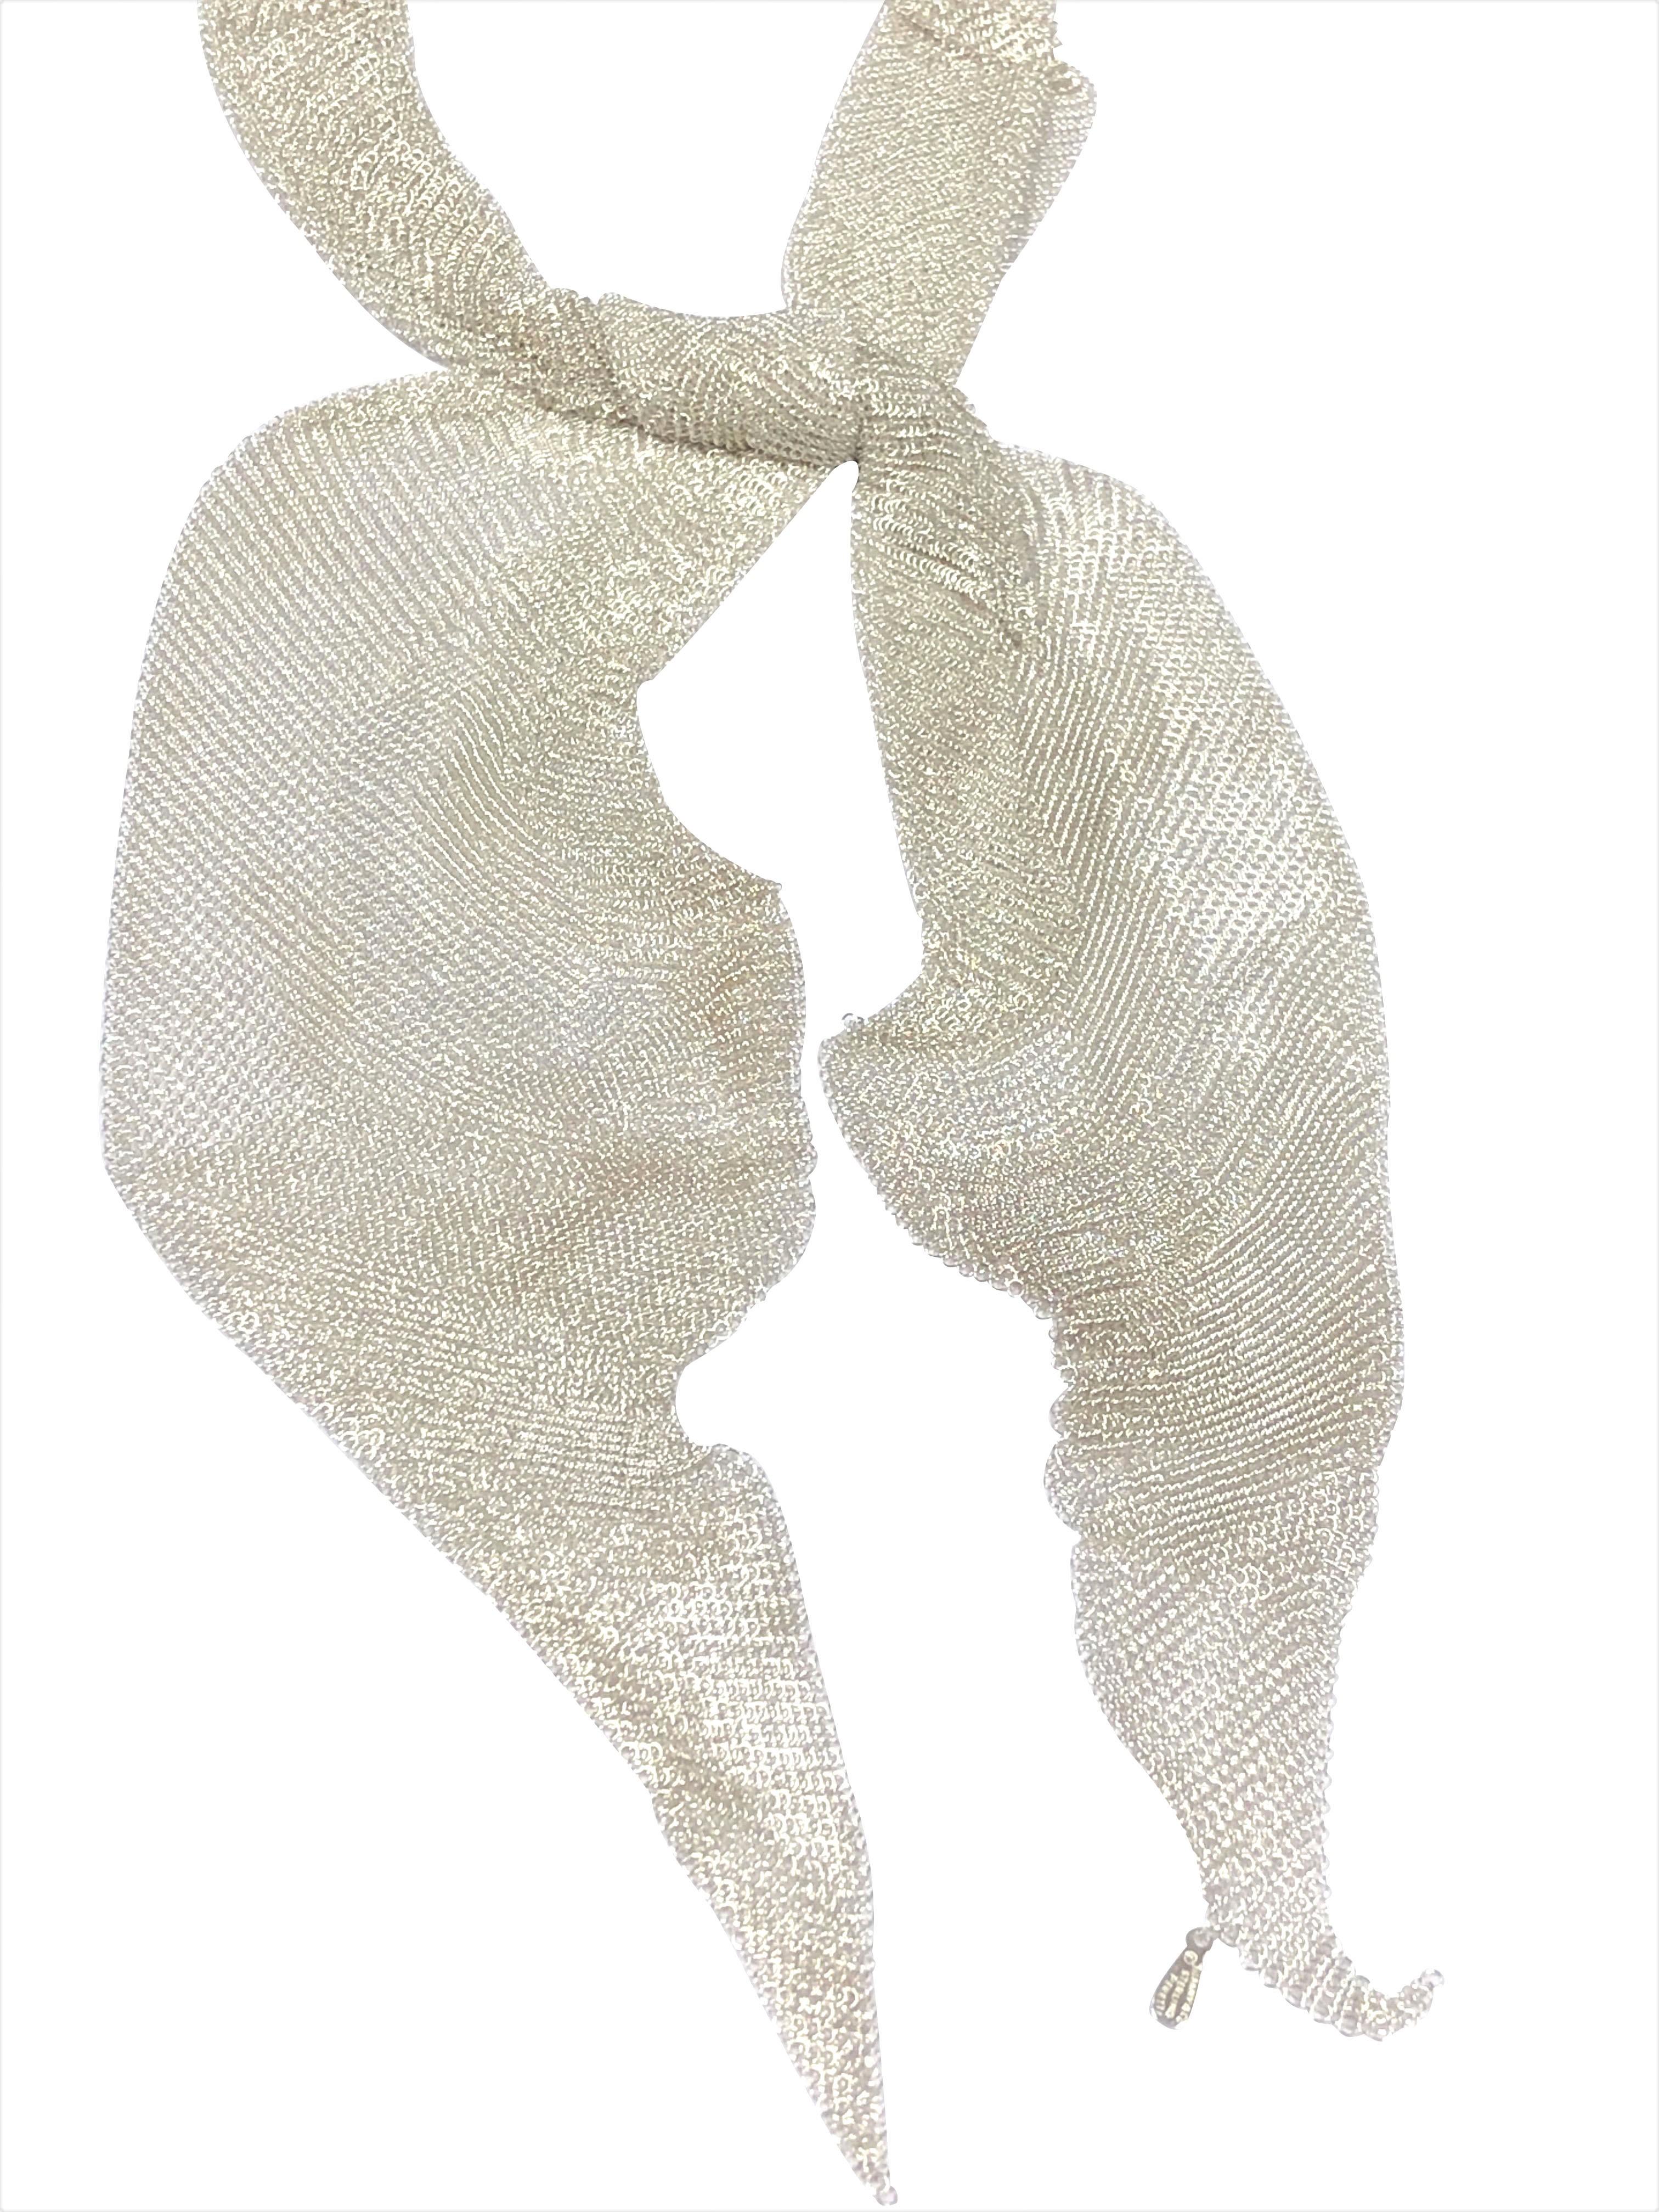 Circa 1990s Elsa Peretti for Tiffany & Company Sterling Silver mesh Scarf, measuring 41 inches in length and 3 inches wide at its widest point. This Scarf is in excellent Unworn condition, never used.